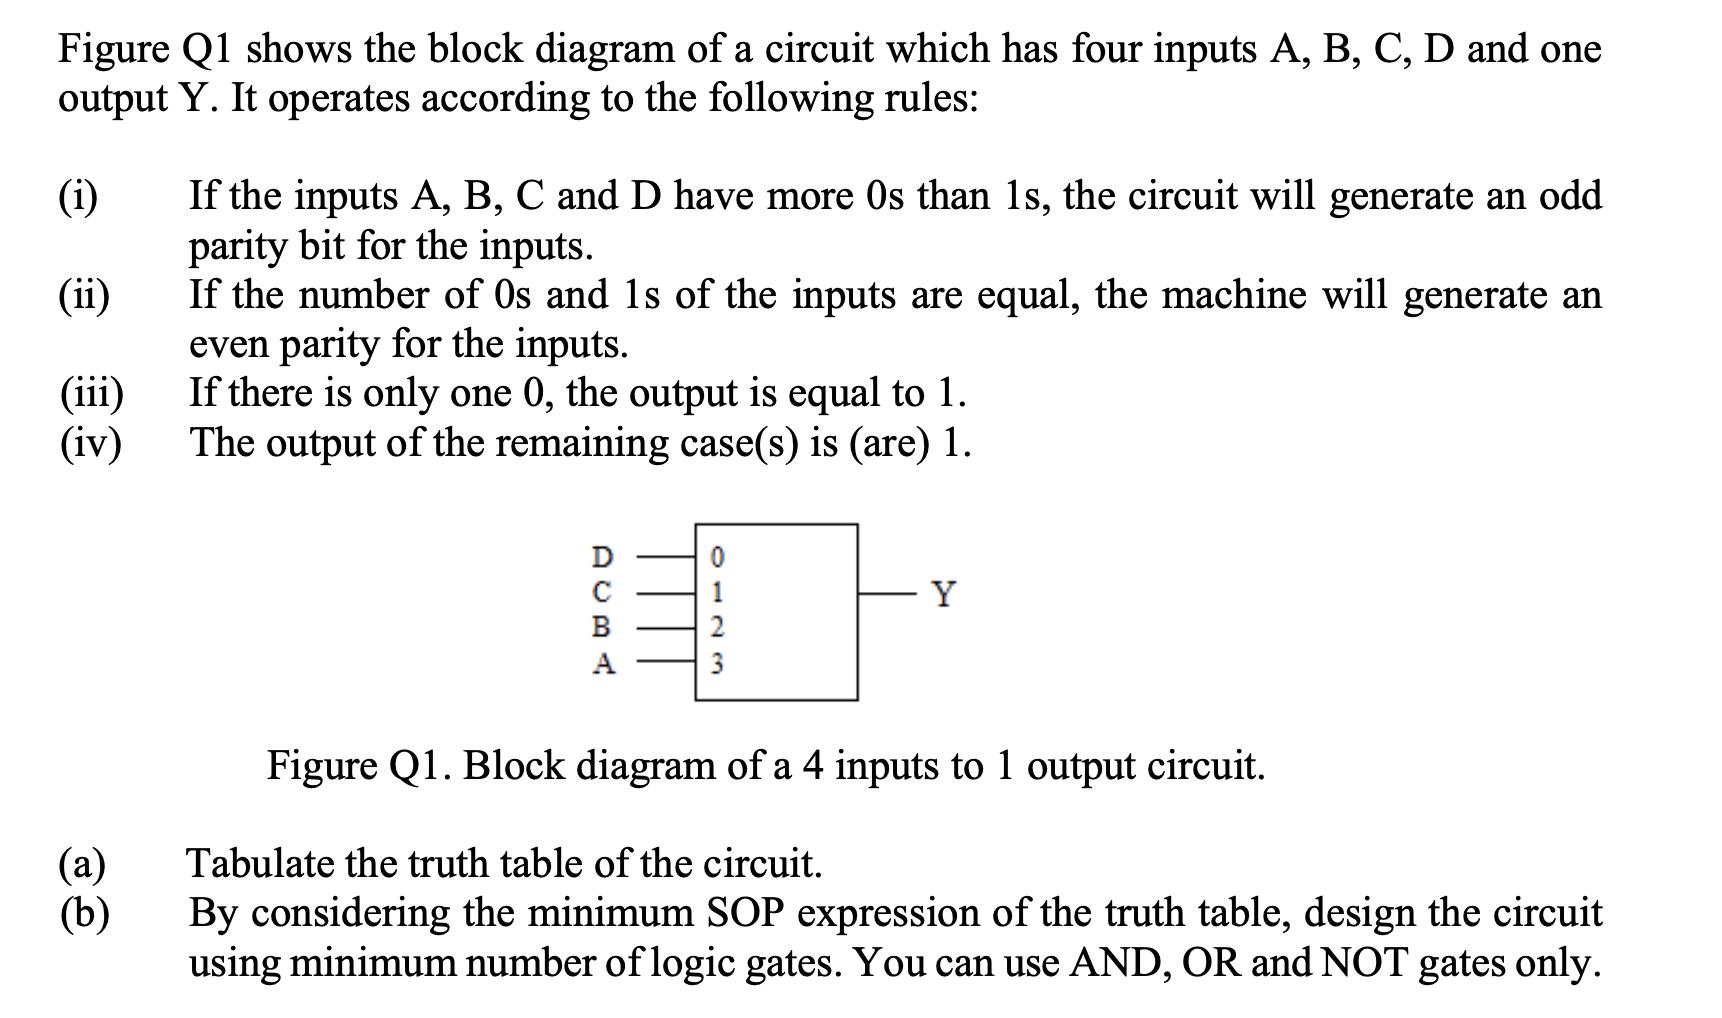 Figure Q1 shows the block diagram of a circuit which has four inputs A, B, C, D and one output Y. It operates